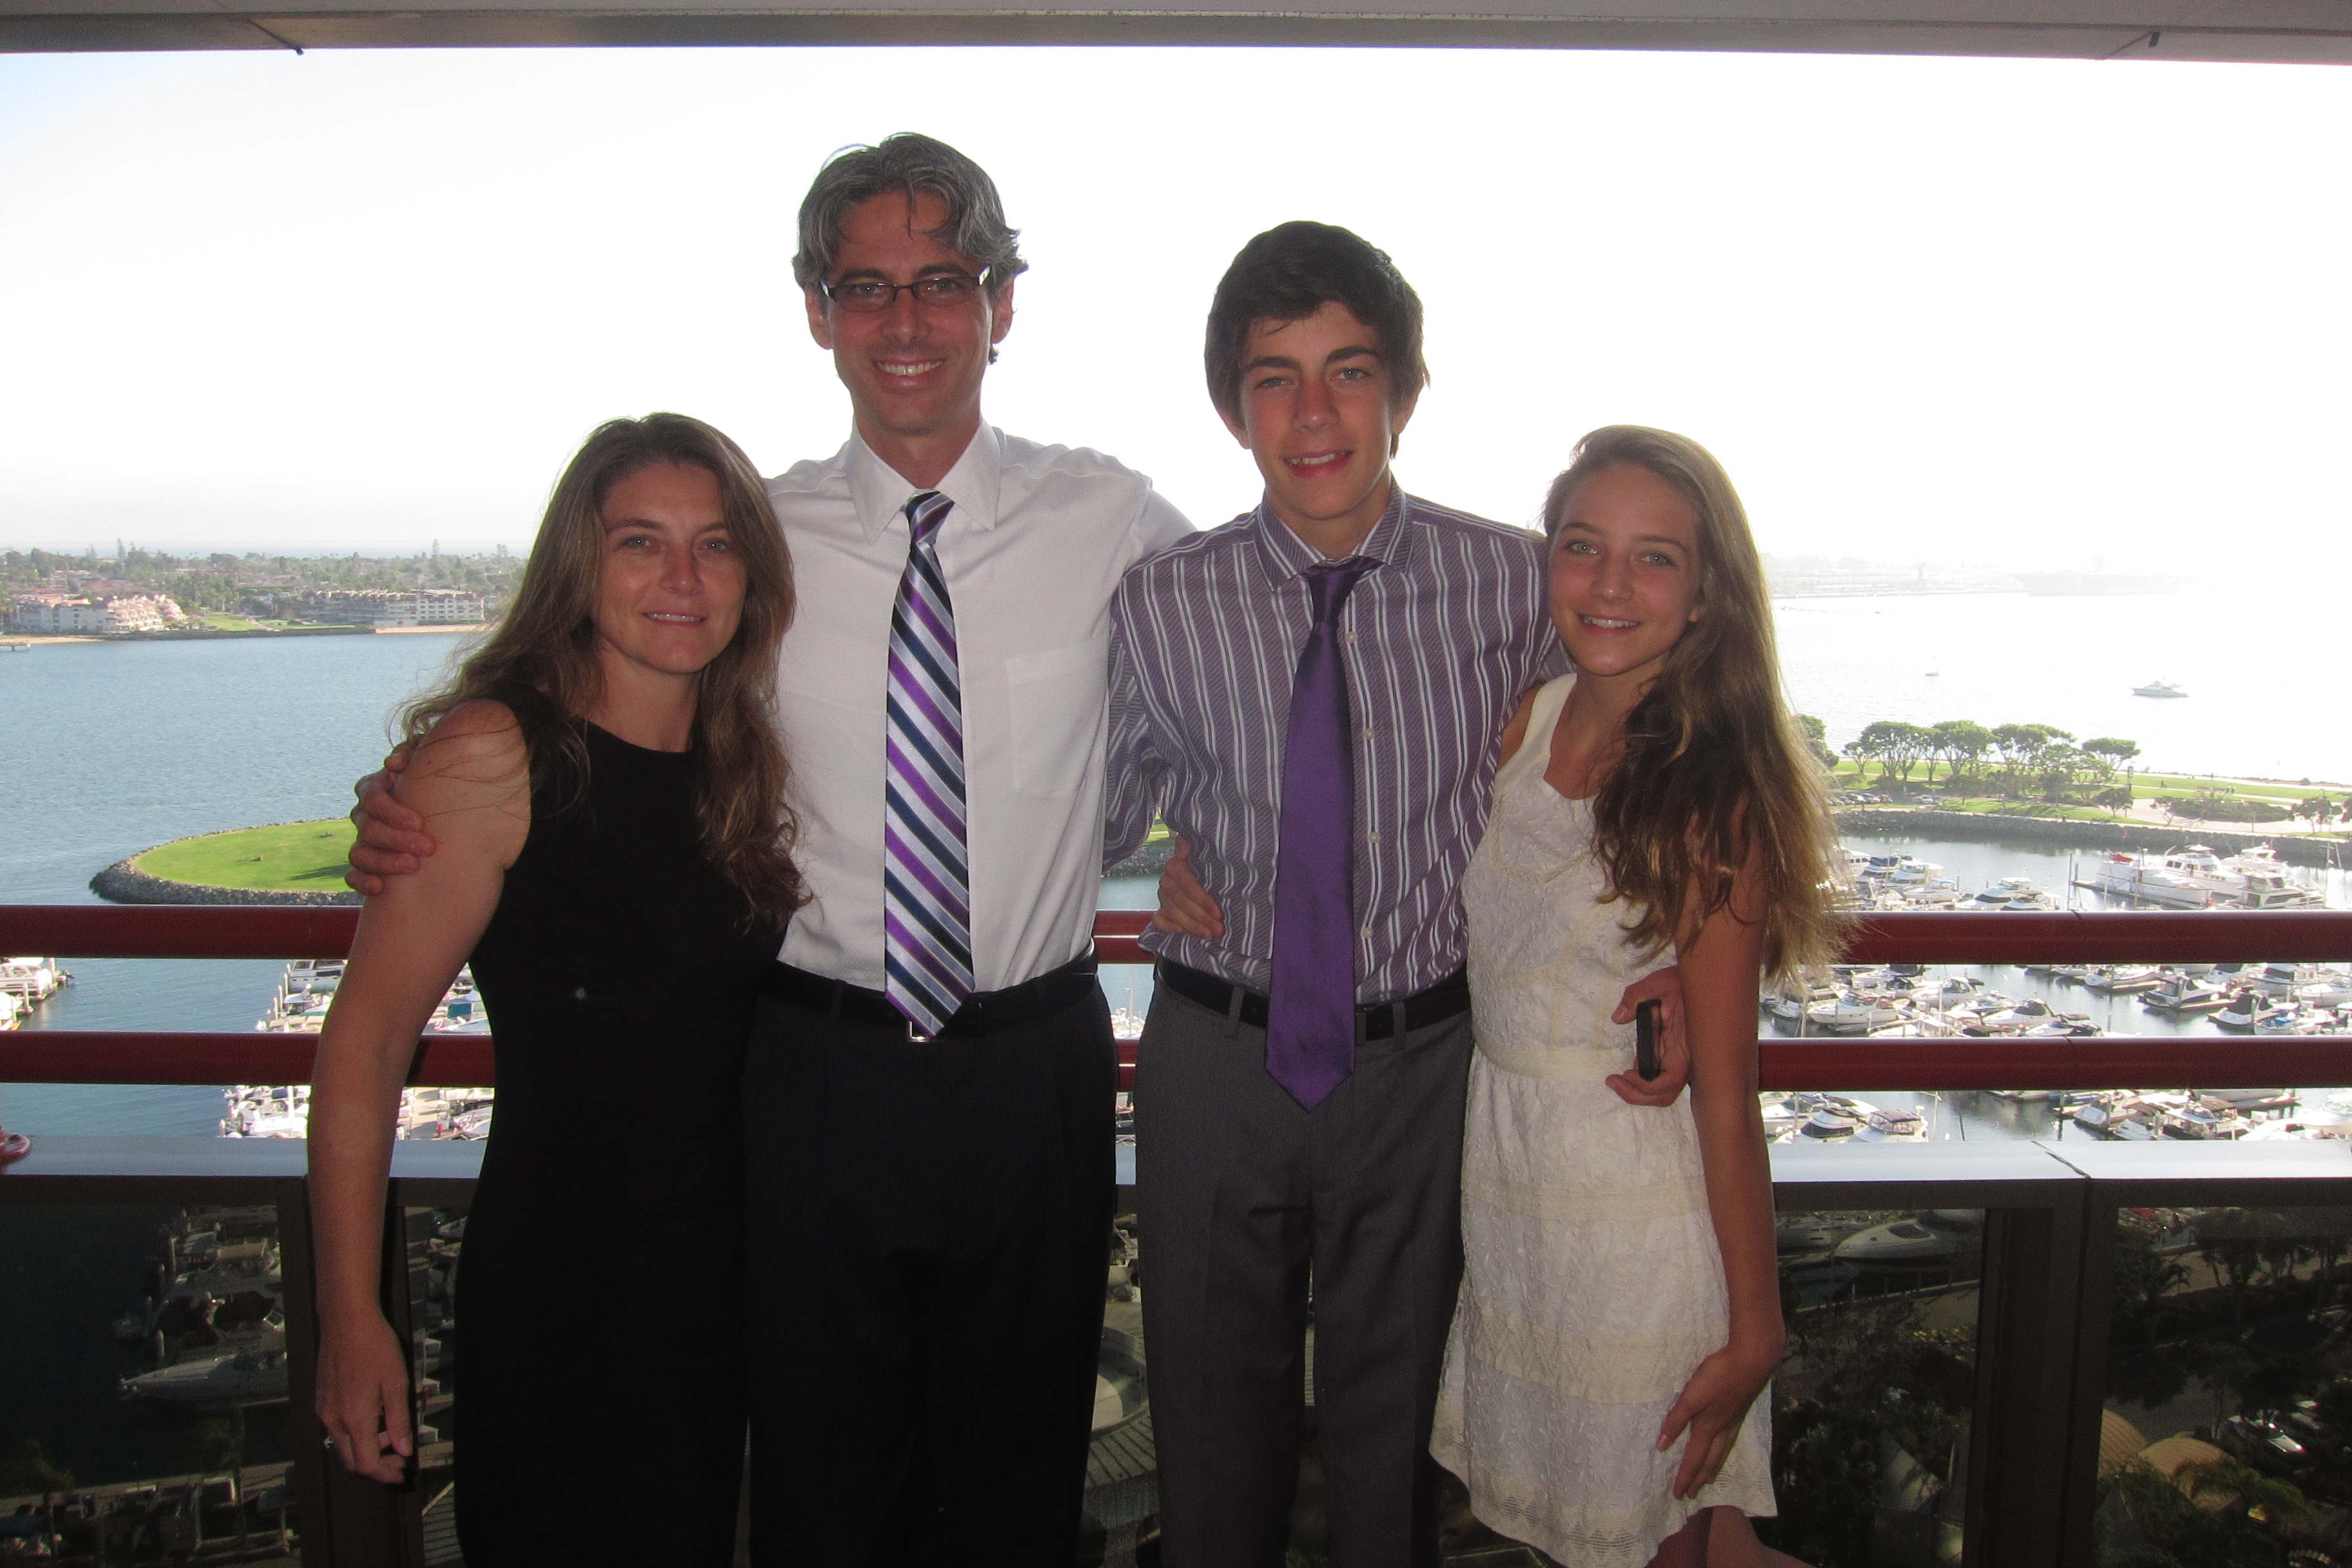 Emily, Manley, Manley v3.0 and Lizzy Feinberg at the National Speakers Association - National Convention 2014, San DIego, CA.